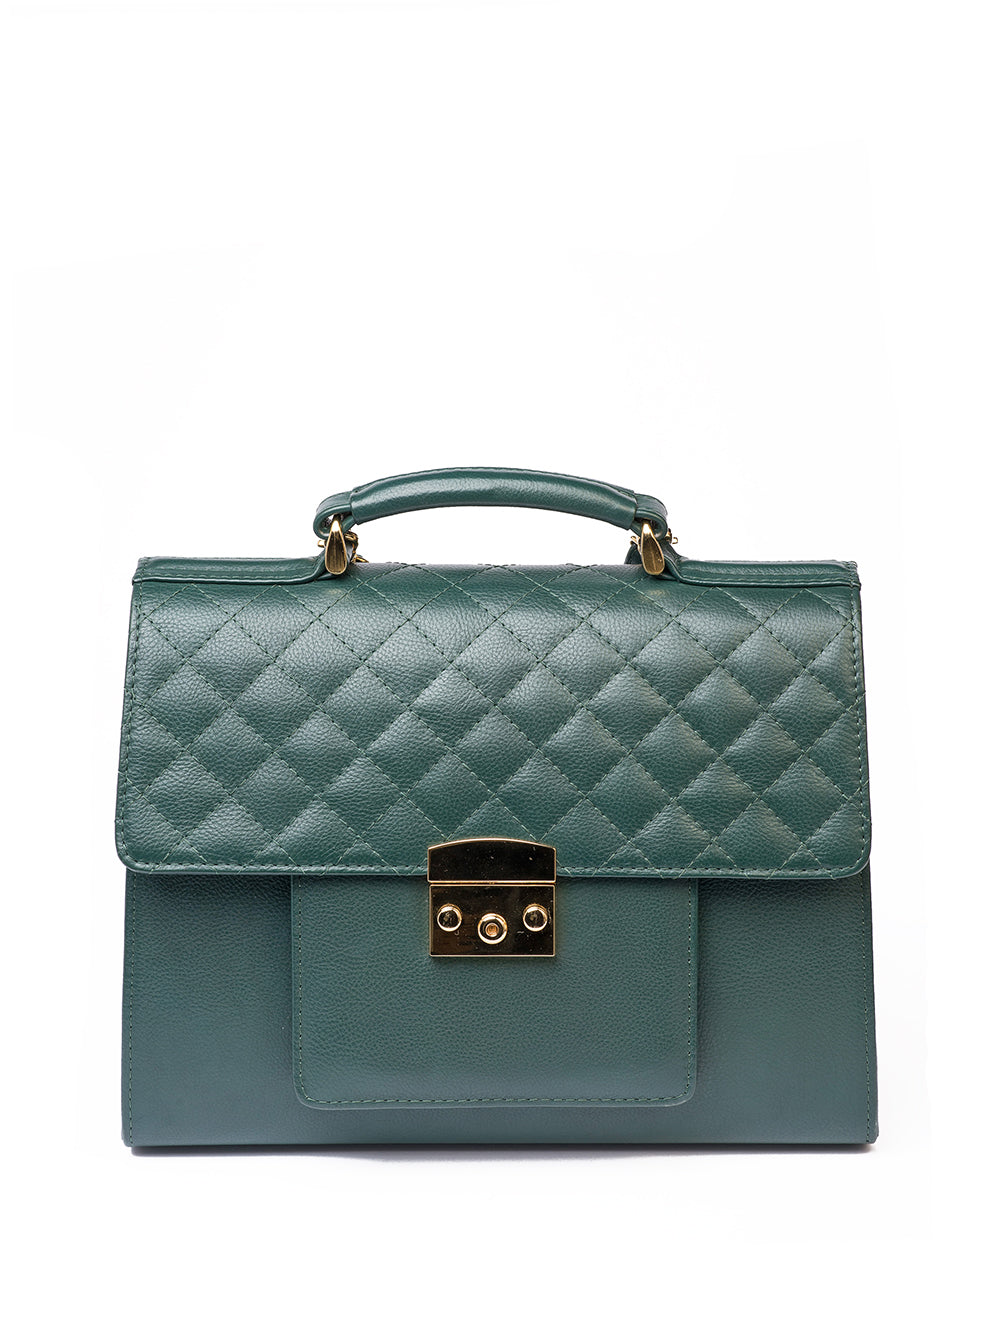 Quilted leather handbag - Green